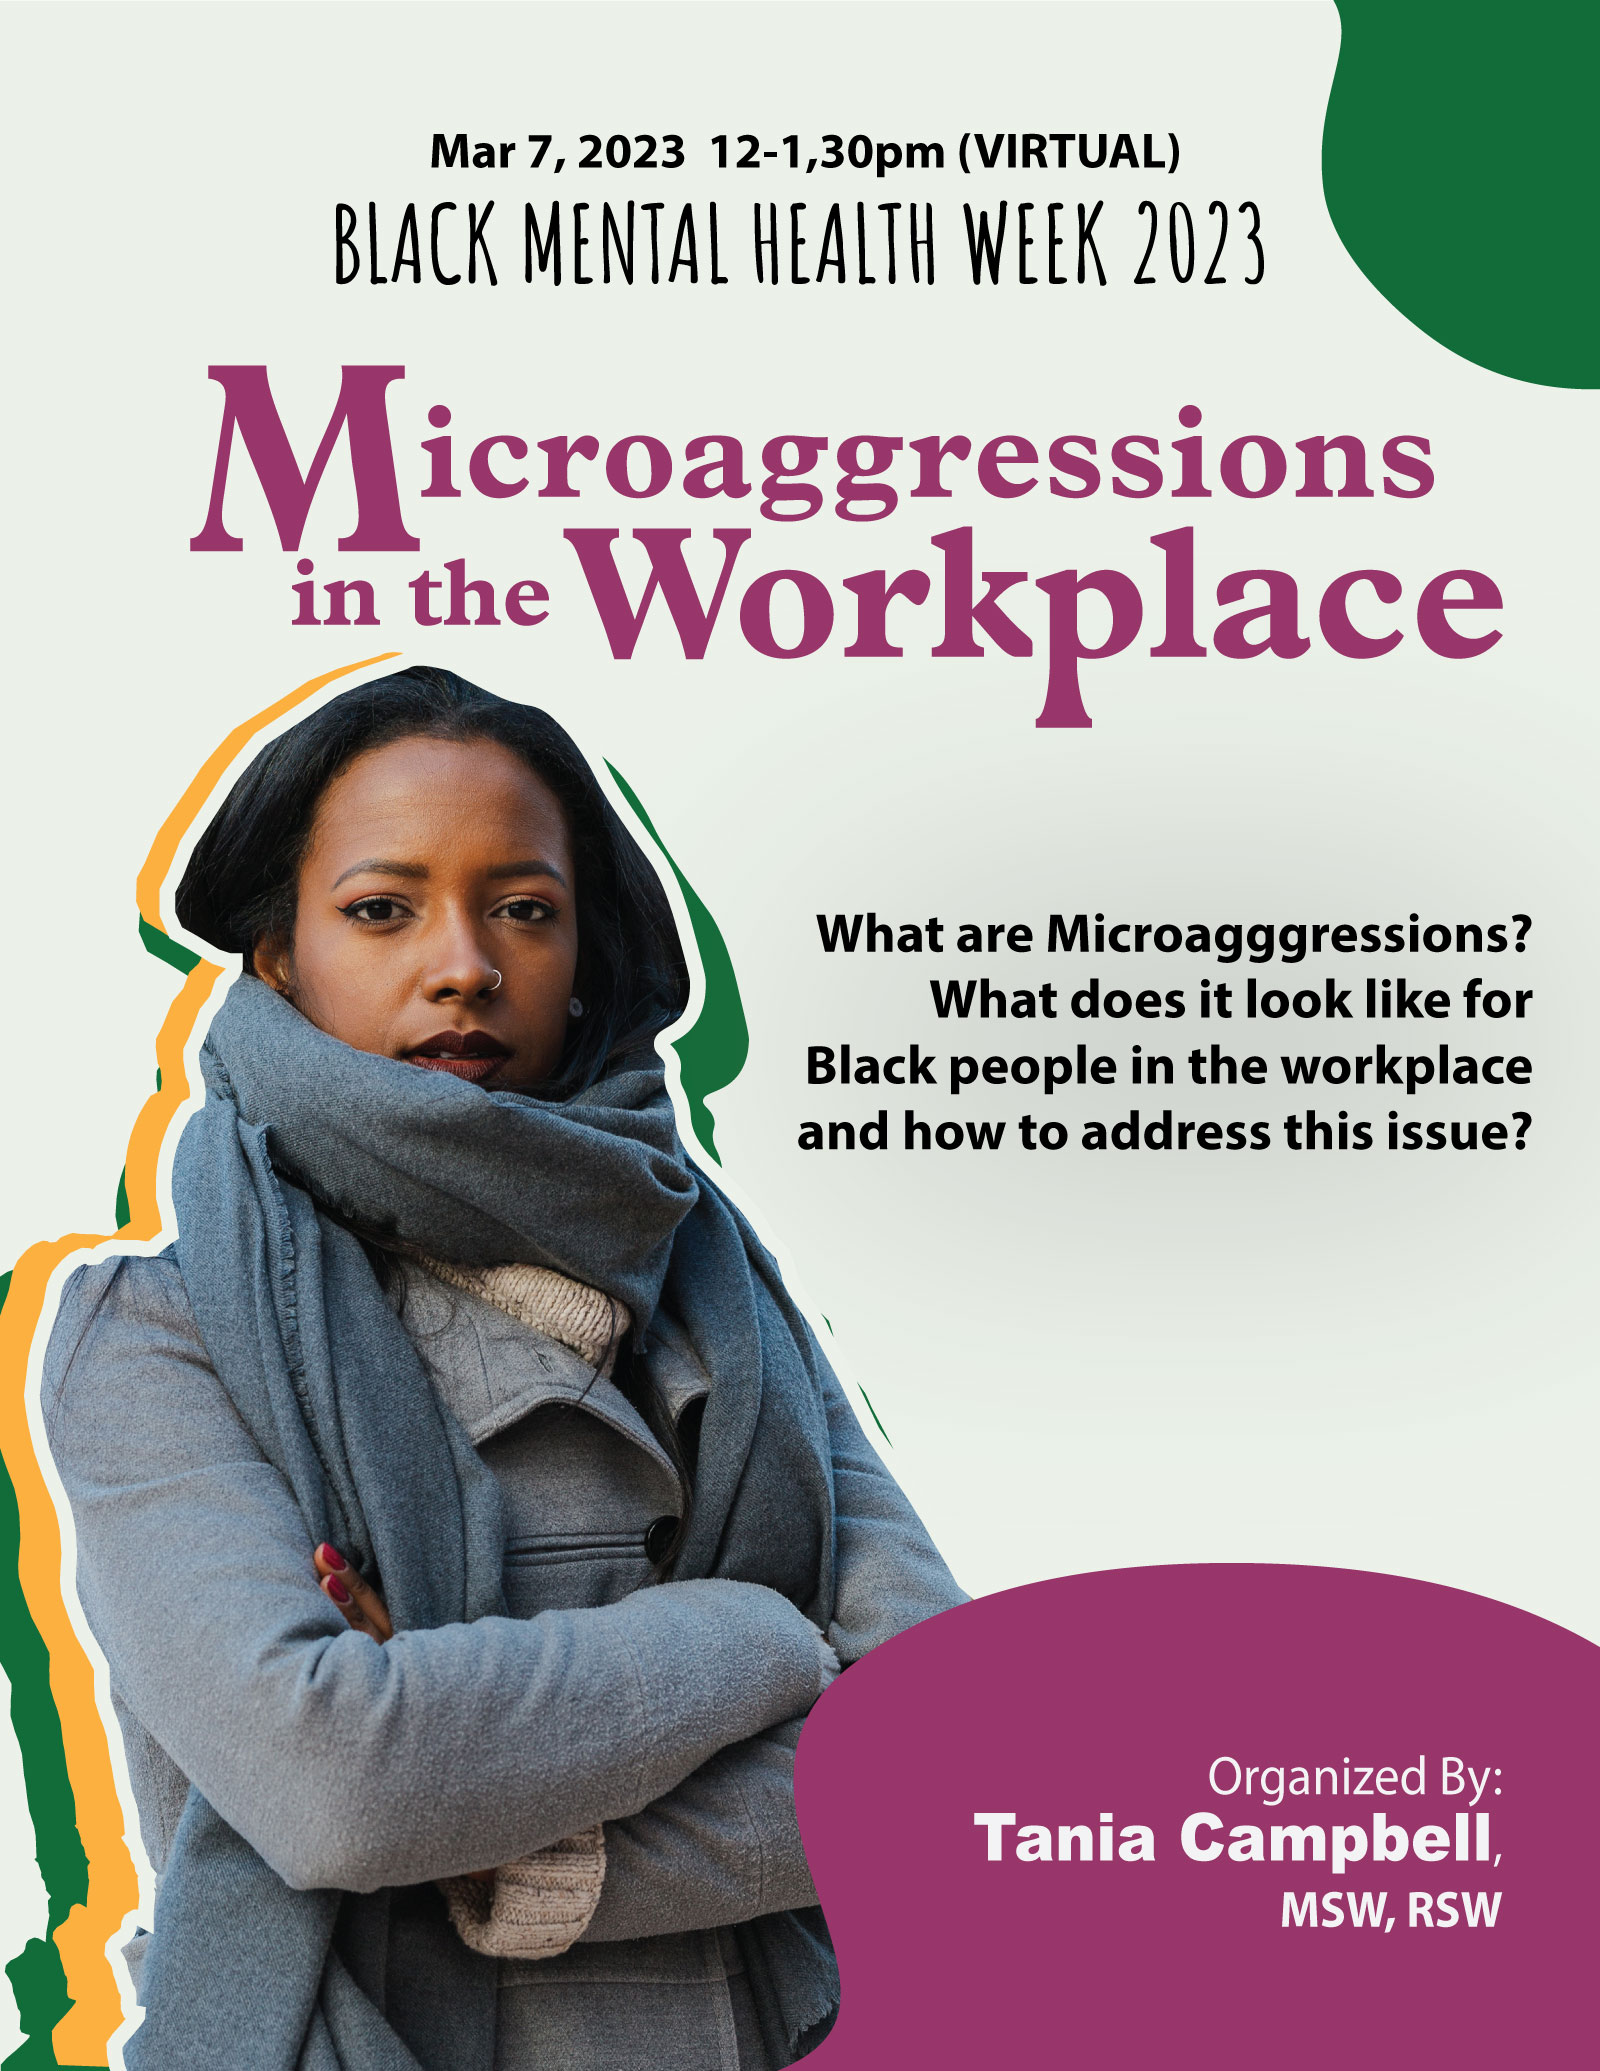 microagression-in-the-workplace-for-black-people